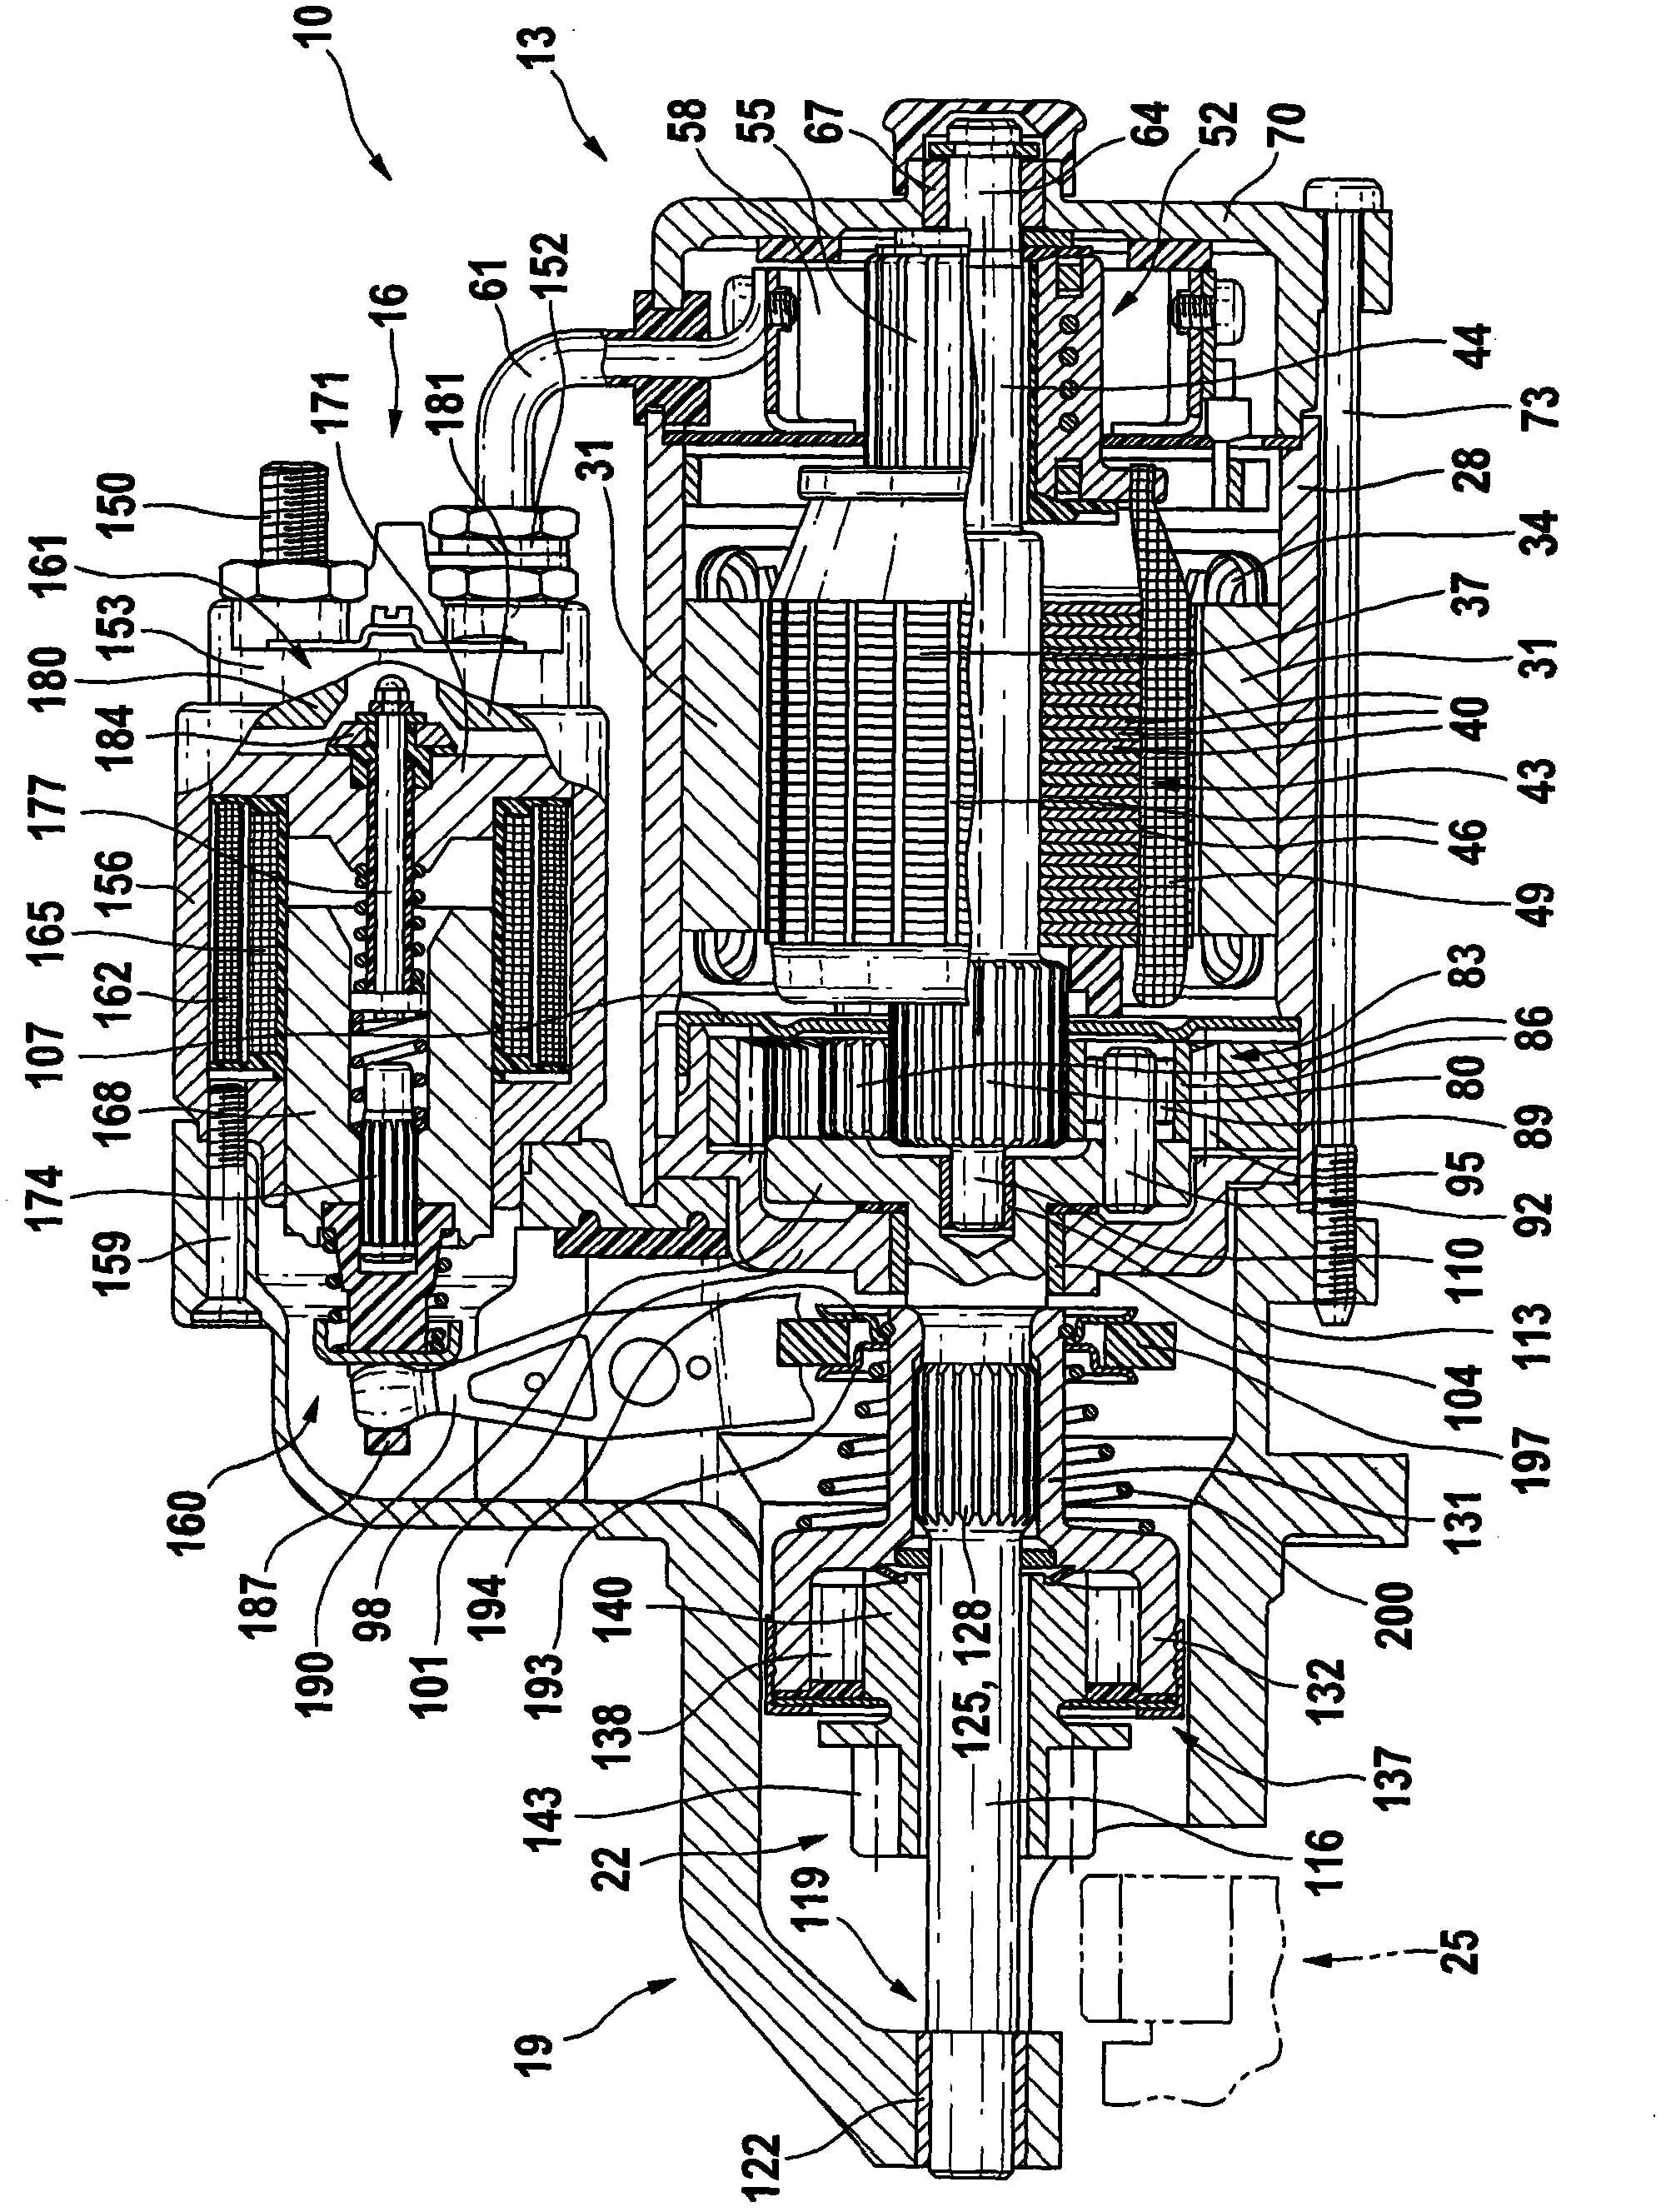 Armature for an electric motor for driving a starter device